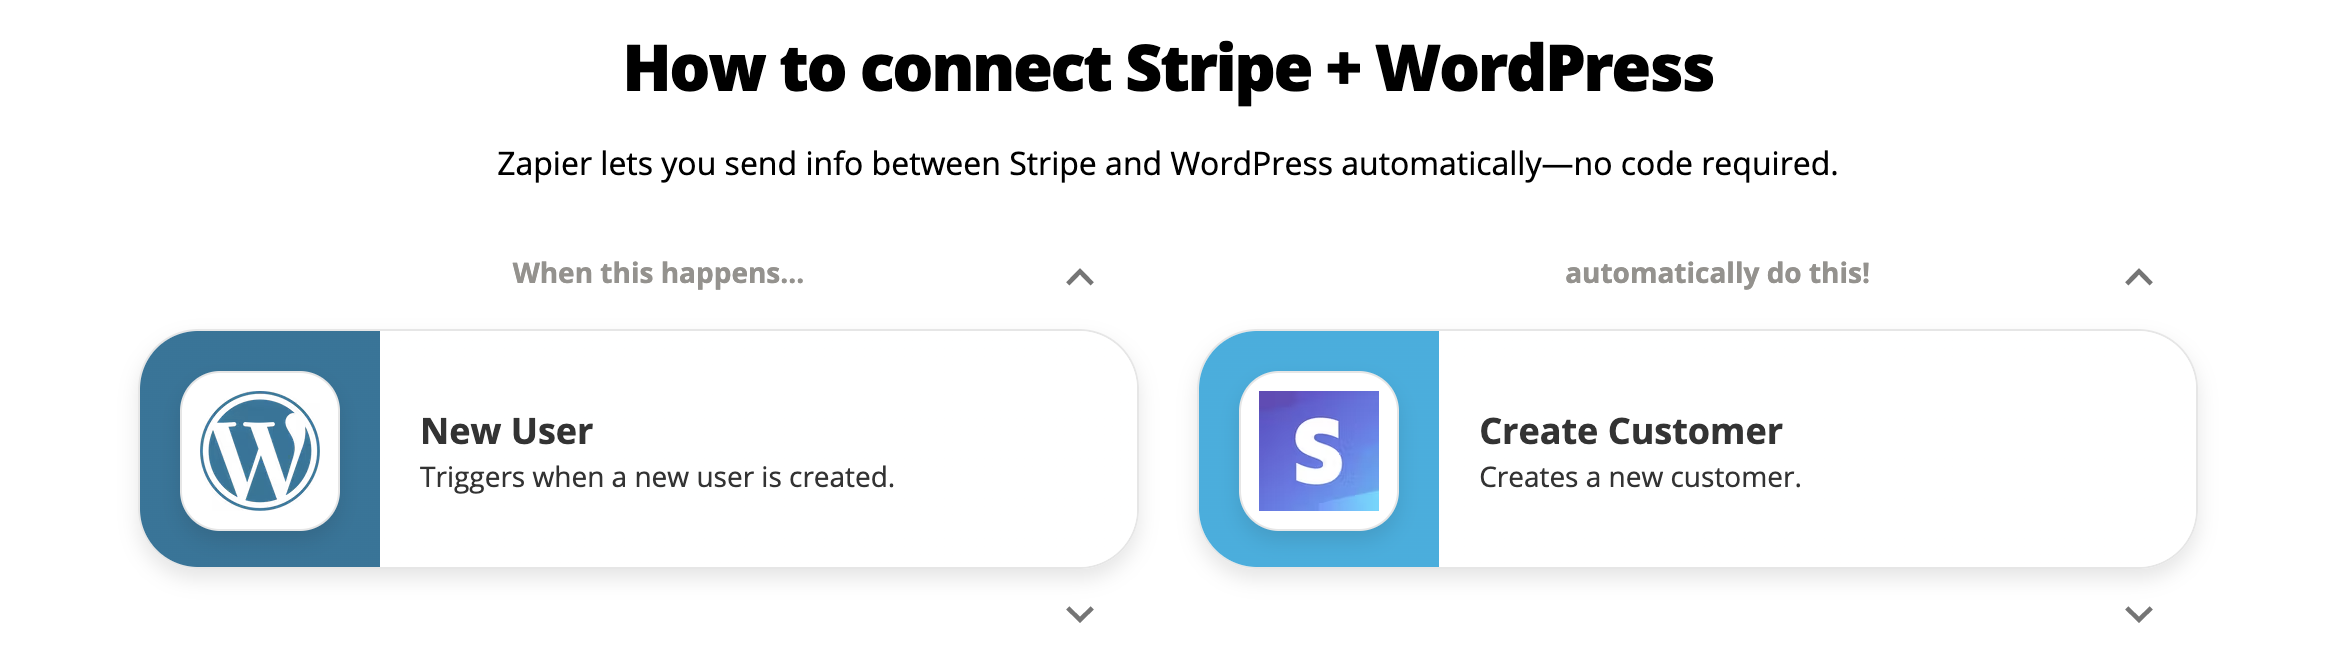 zapier.com marketing page showing the option to create a Stripe Customer when a new user is created in WordPress